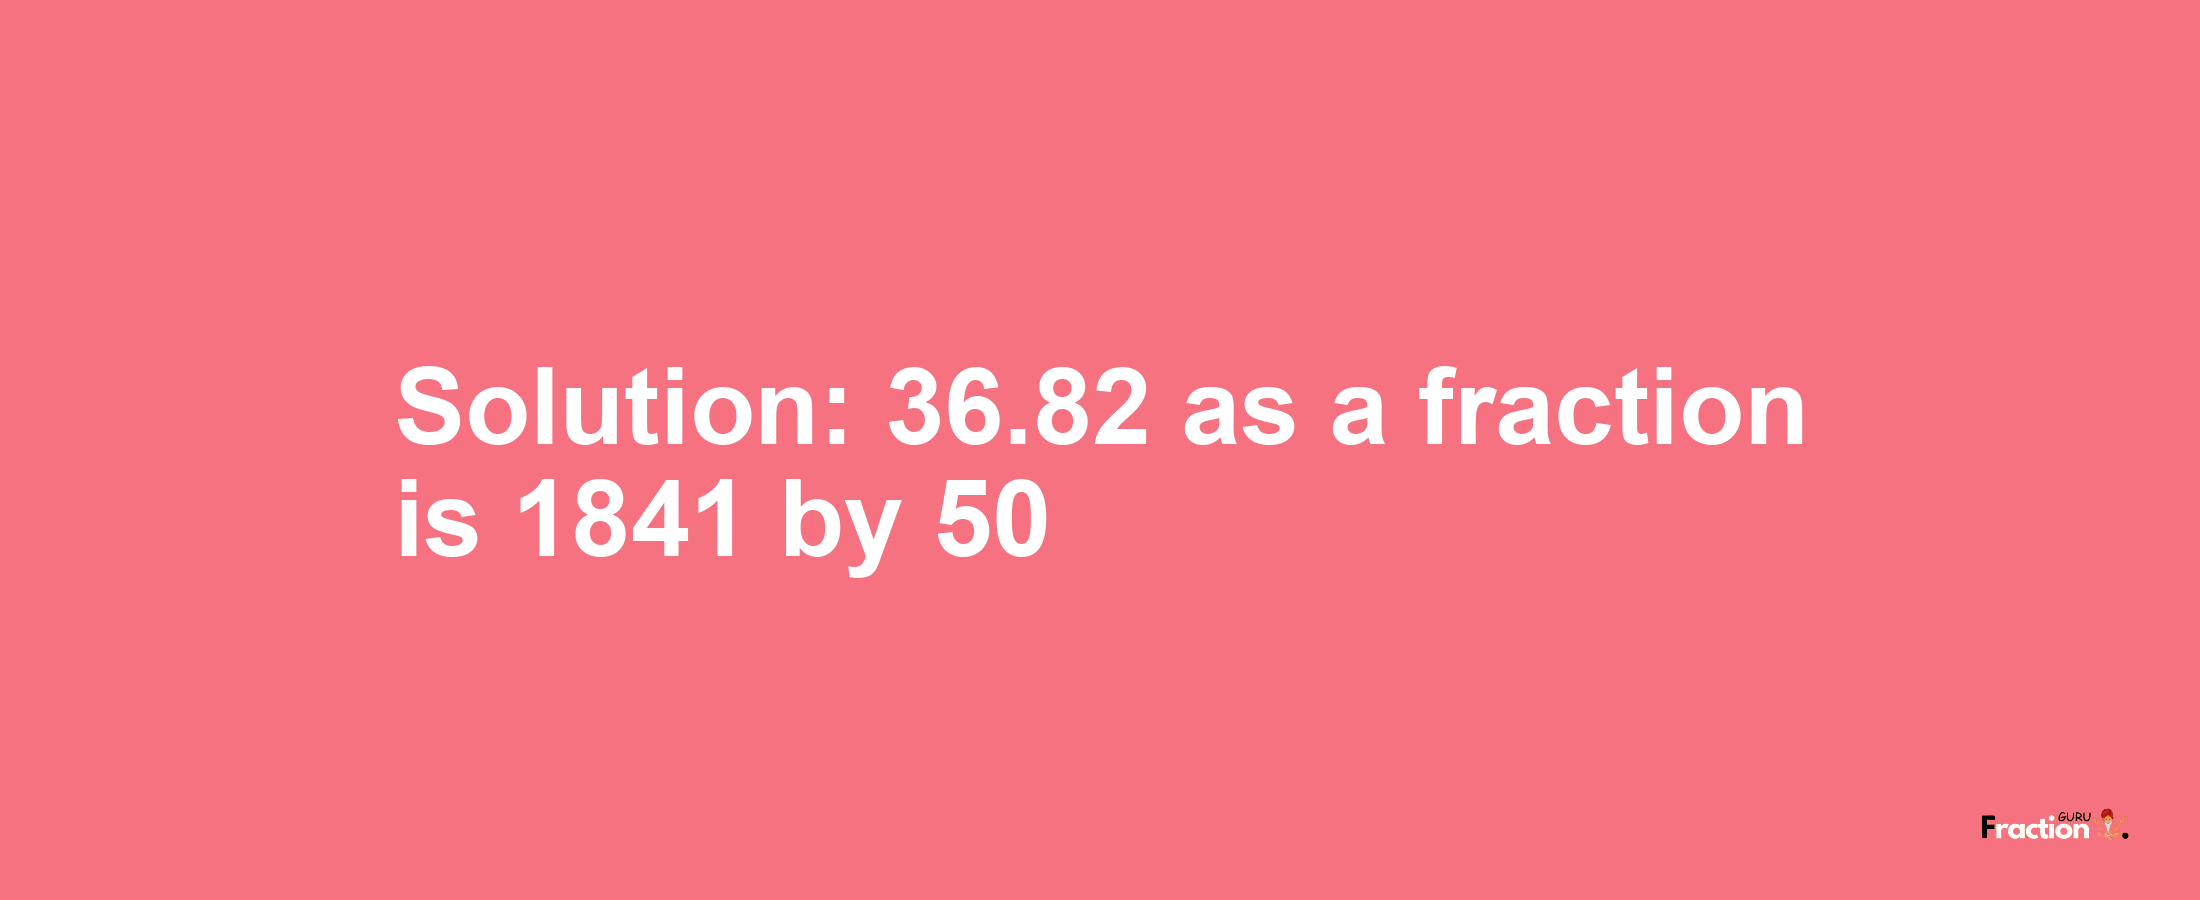 Solution:36.82 as a fraction is 1841/50